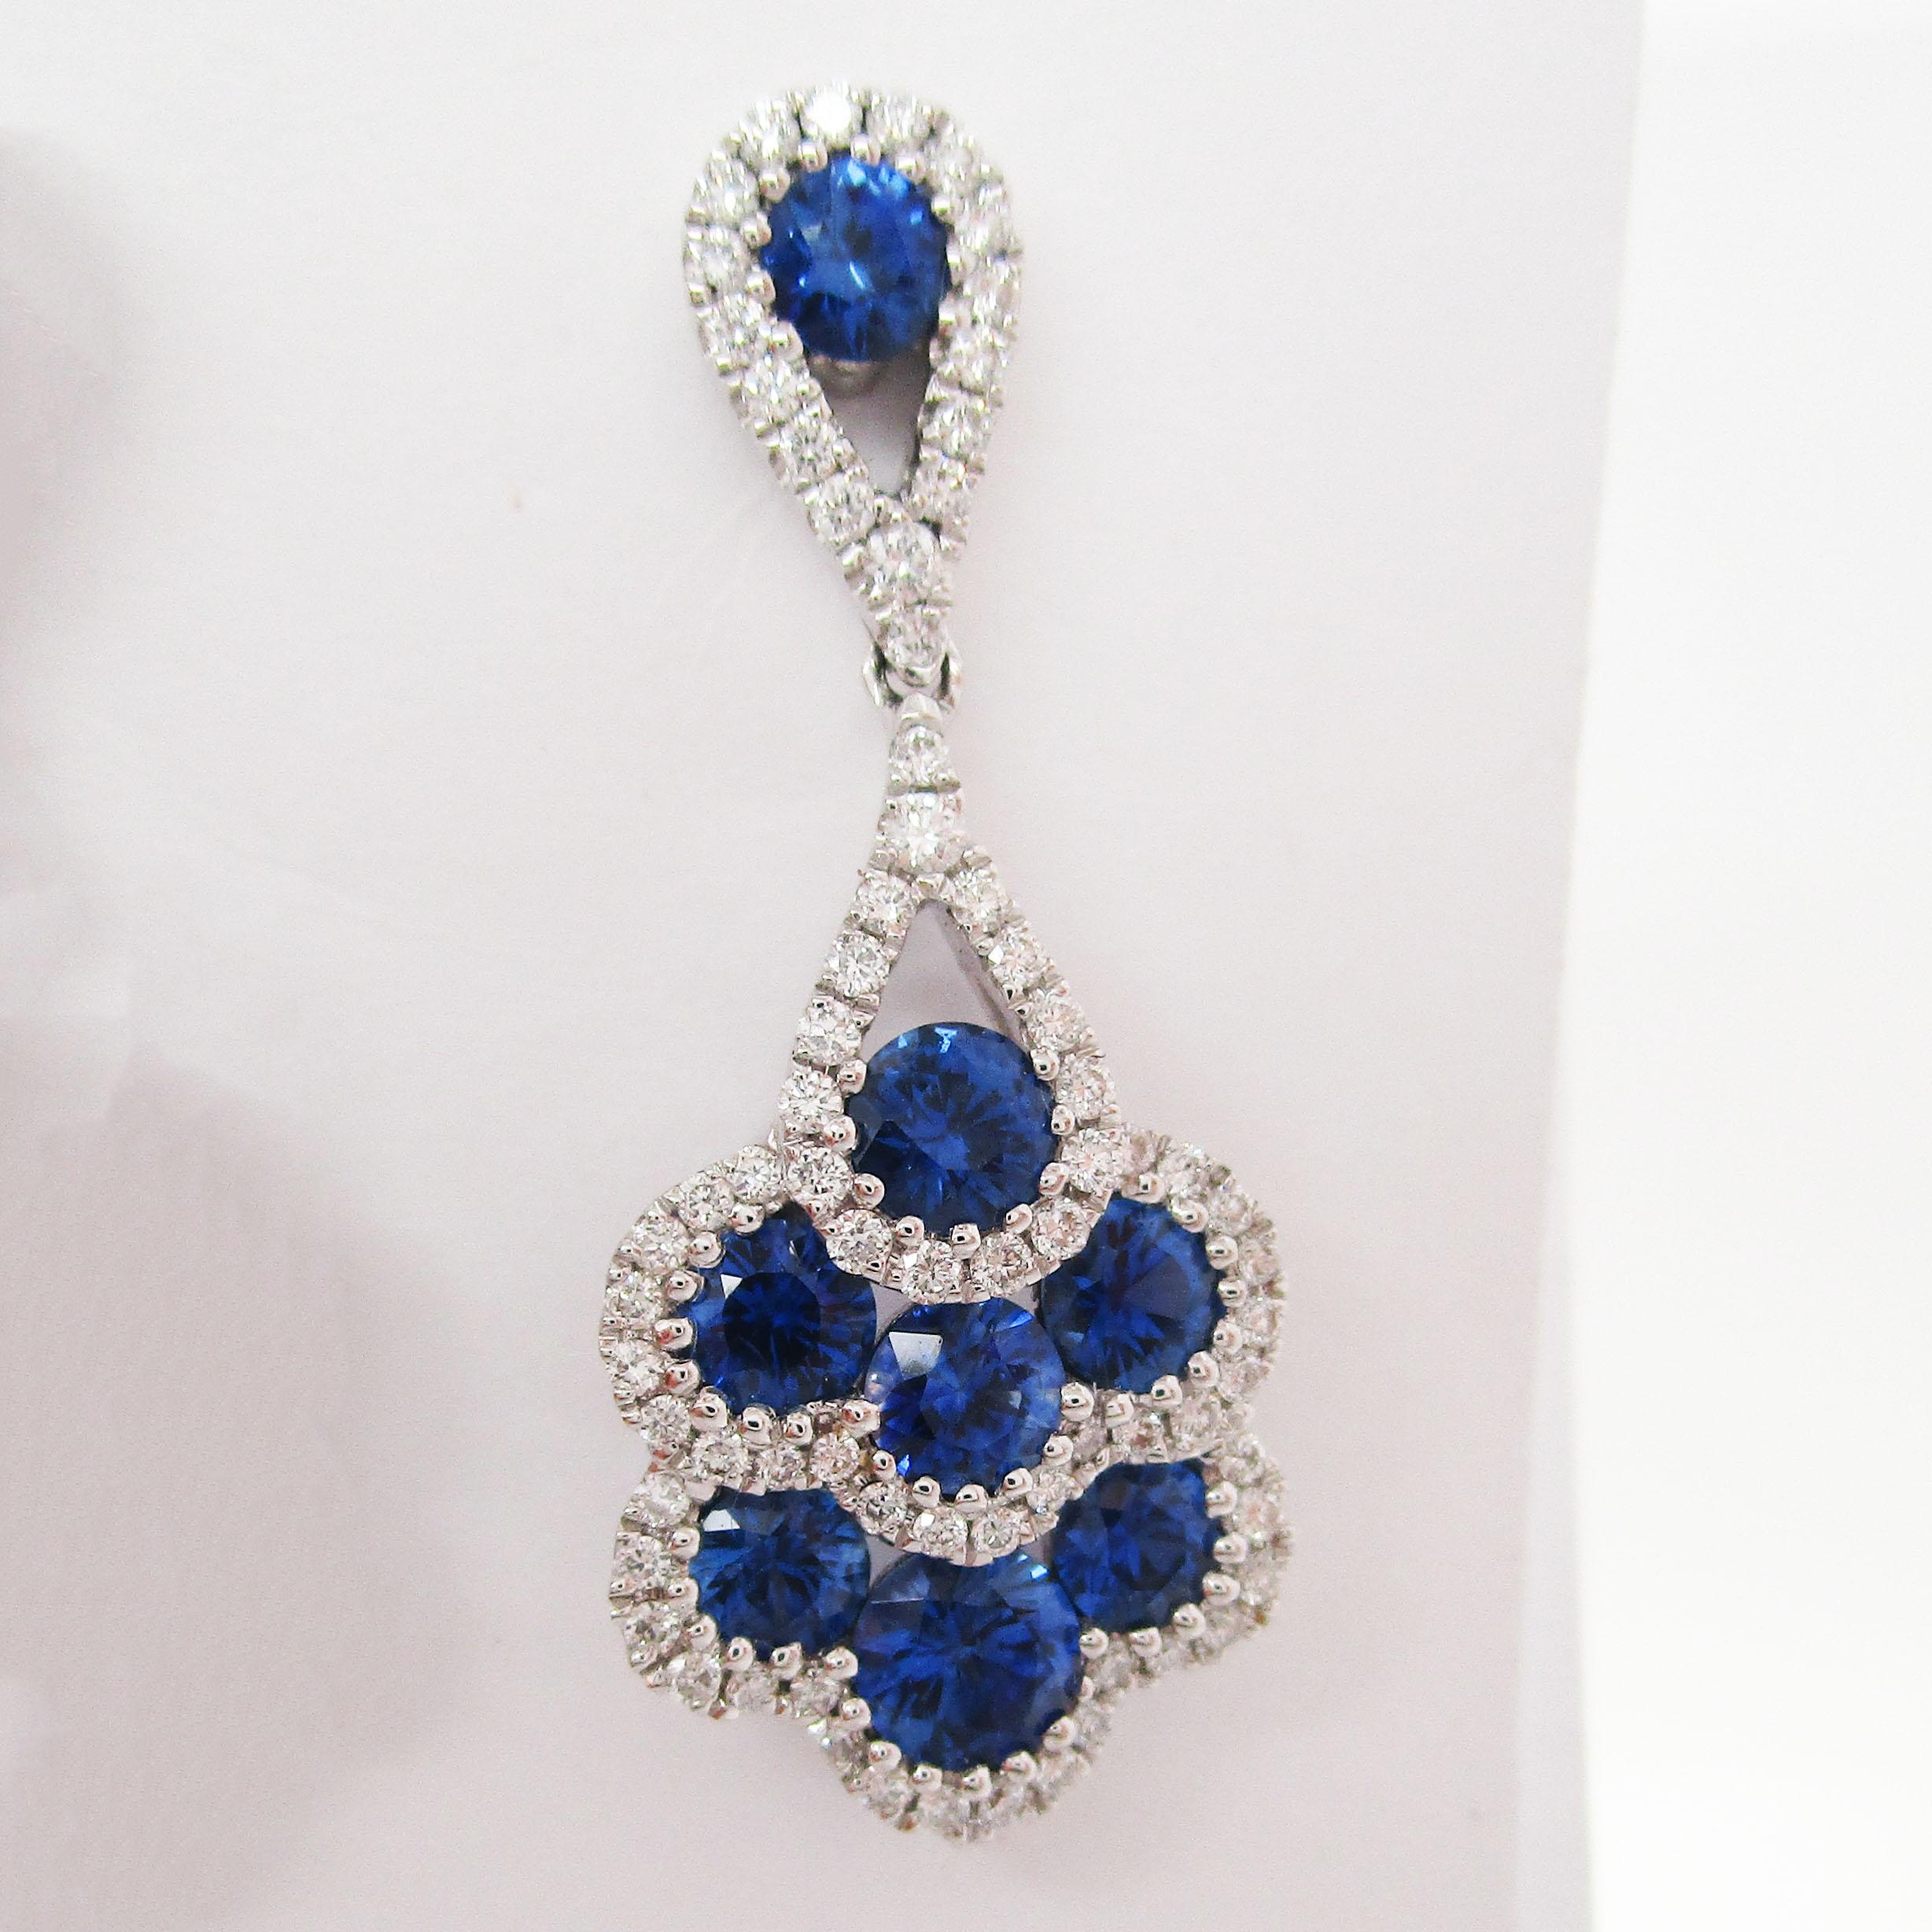 This is an absolutely breathtaking pair of earrings in 18k white gold with a stunning selection of bright white diamonds and rich royal blue sapphires. The earrings have a classic dangle layout that is fully articulated for an excellent range of